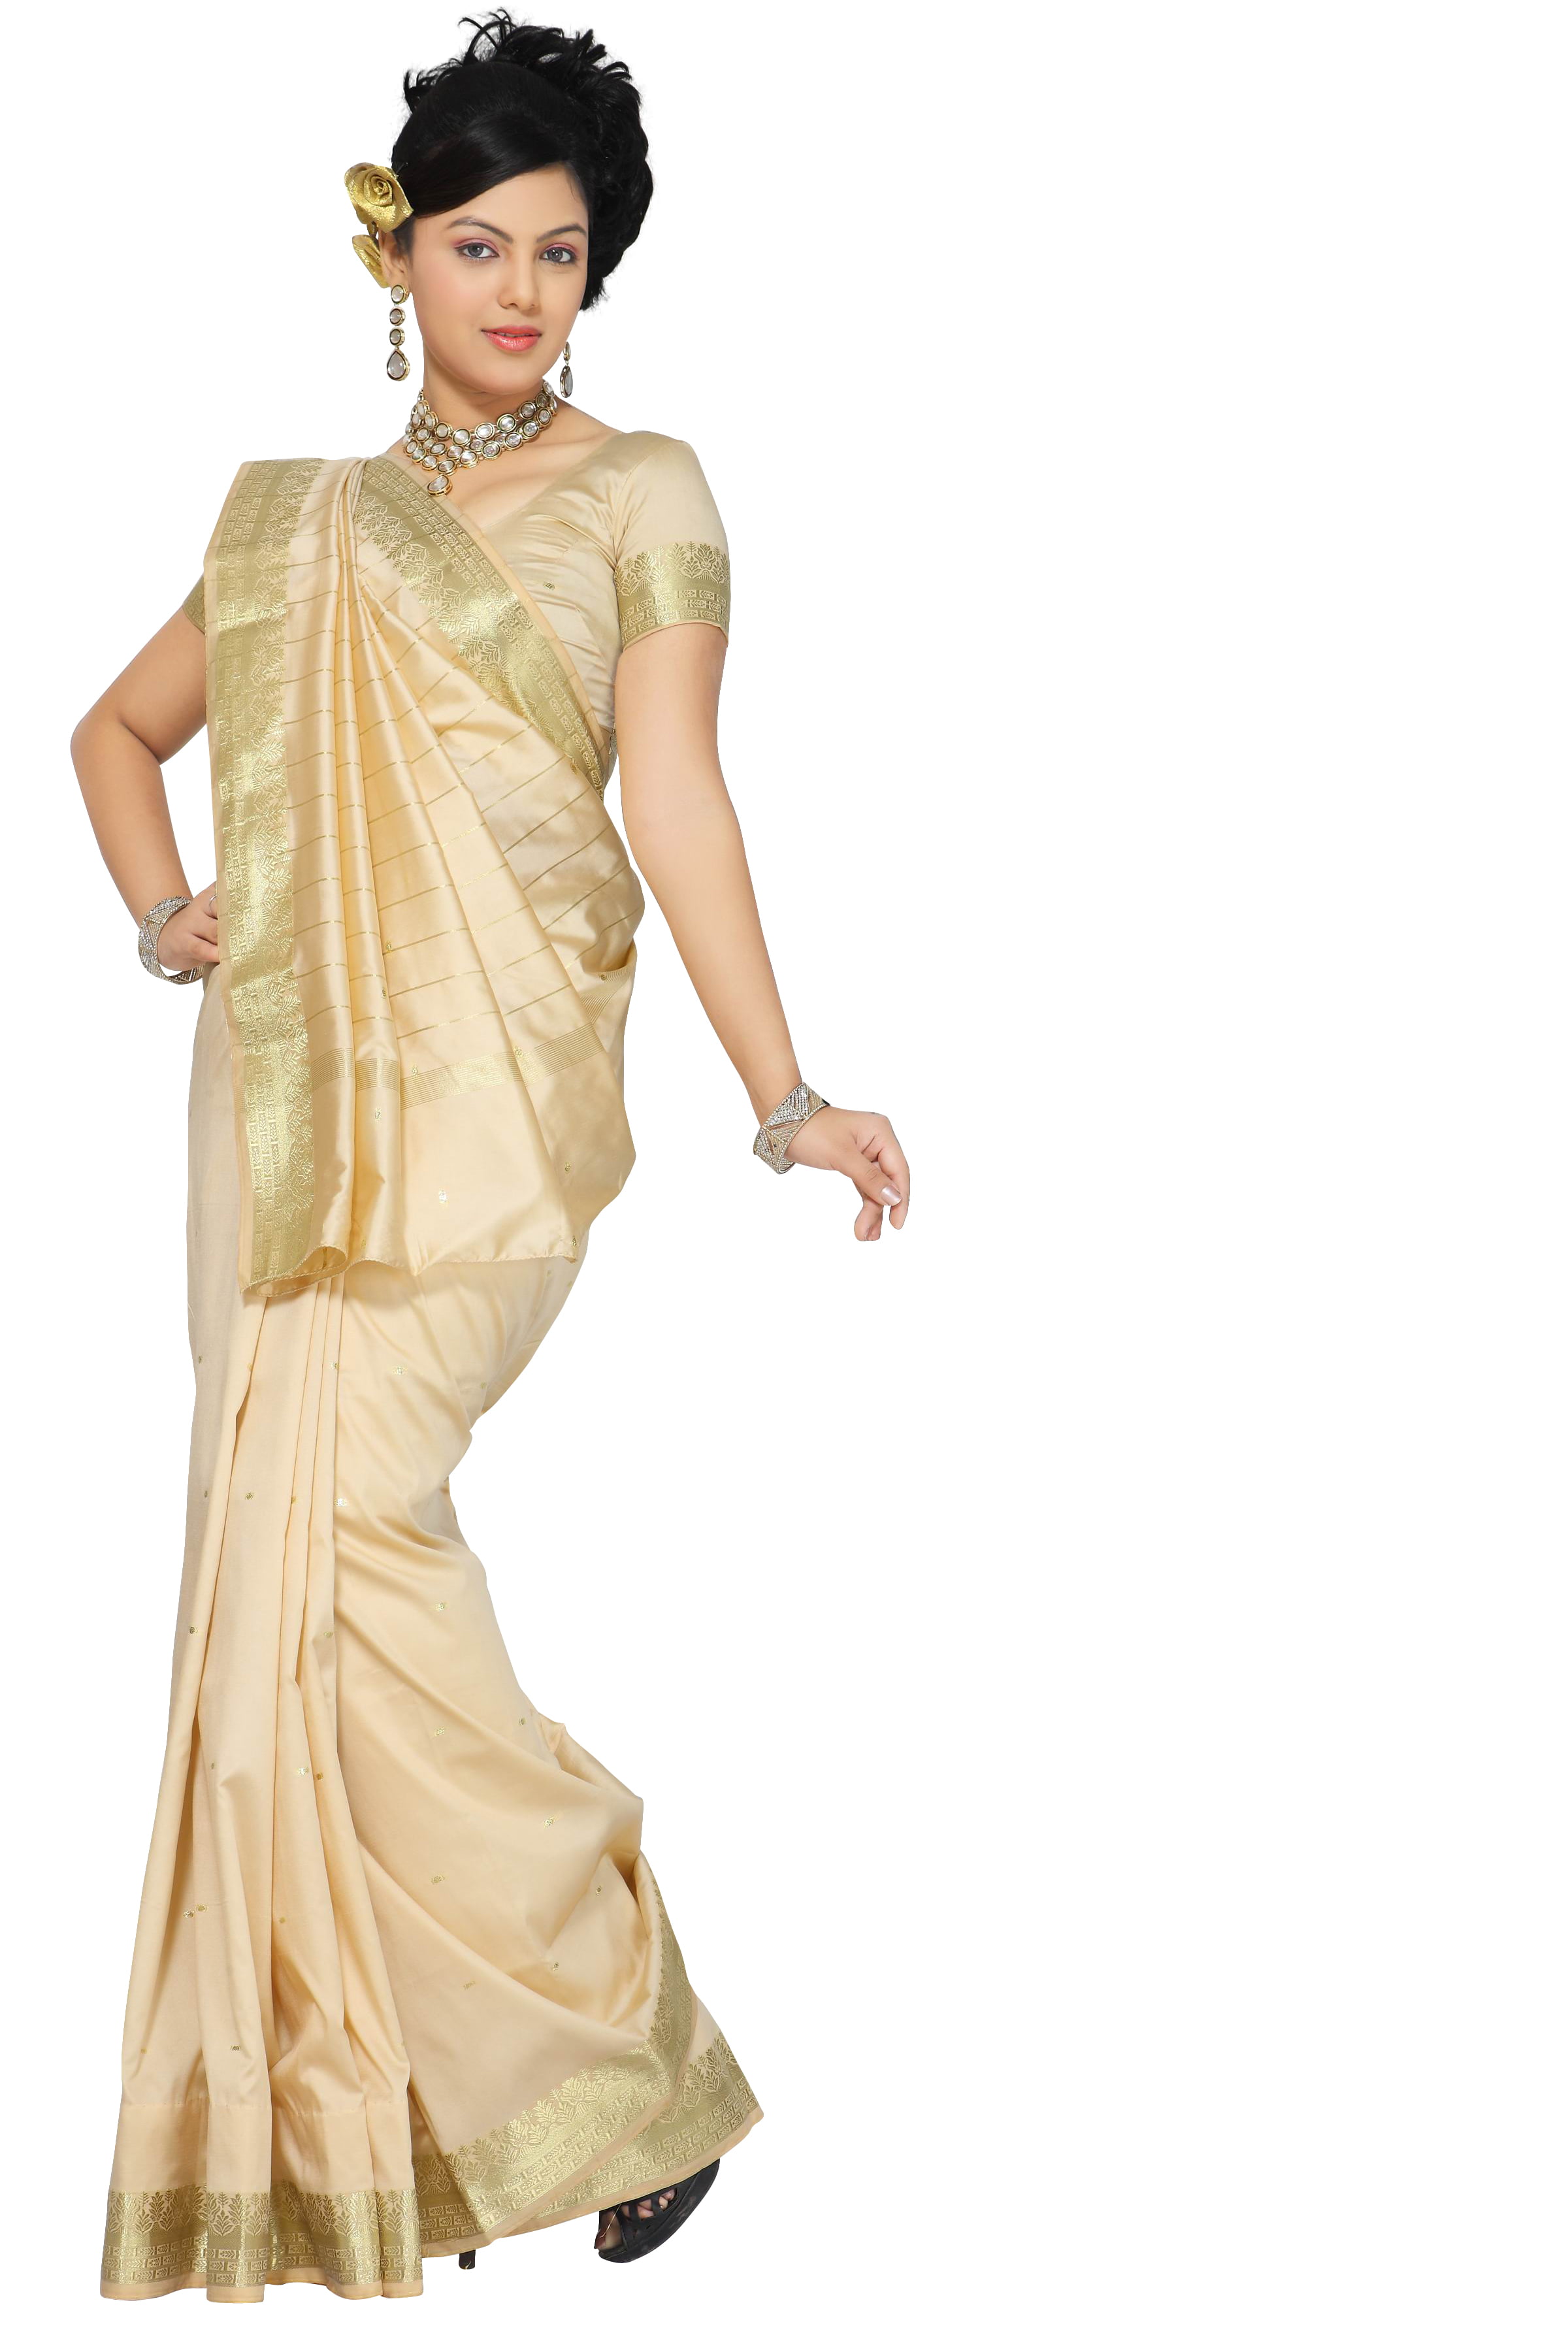 Indian Full embroidery saree With Golden Border,& Come With Readymade Blouse